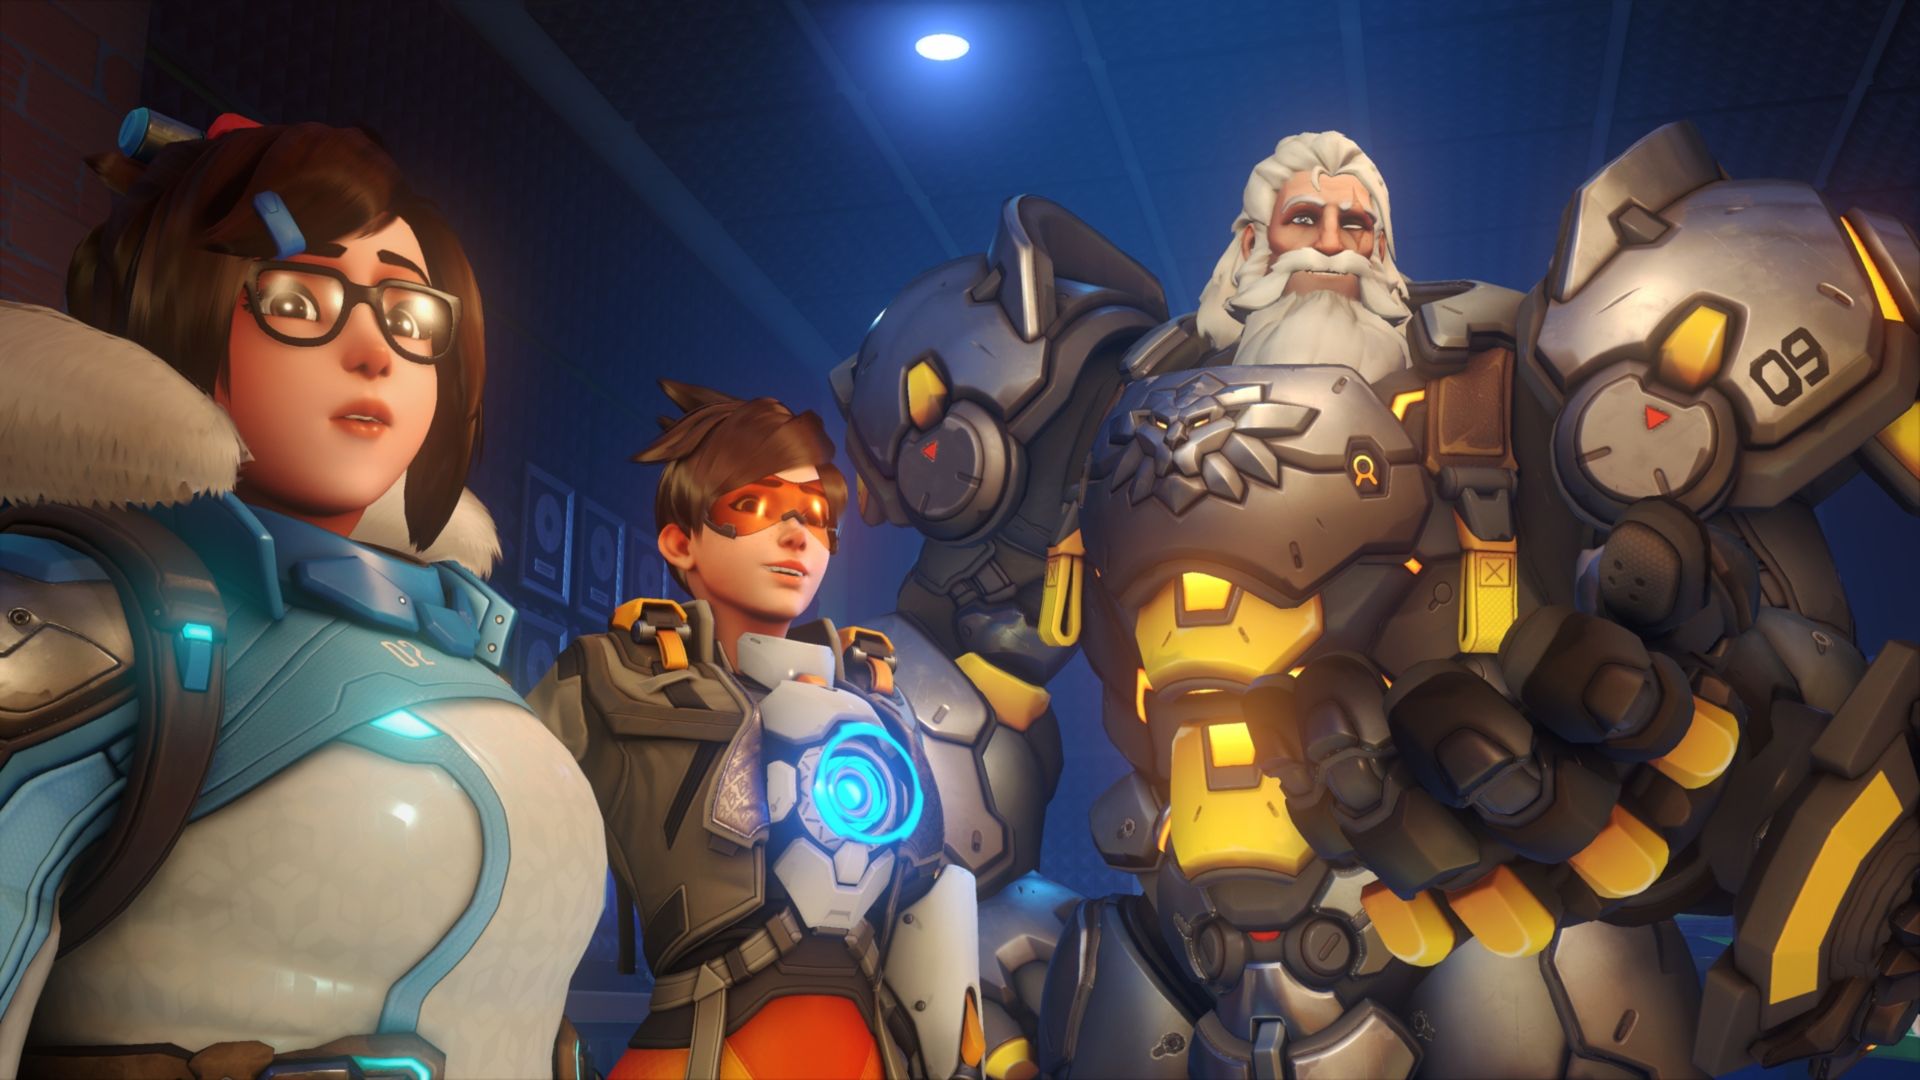 Today, we are covering how to get an Overwatch 2 Beta key, as well as answering the questions: 